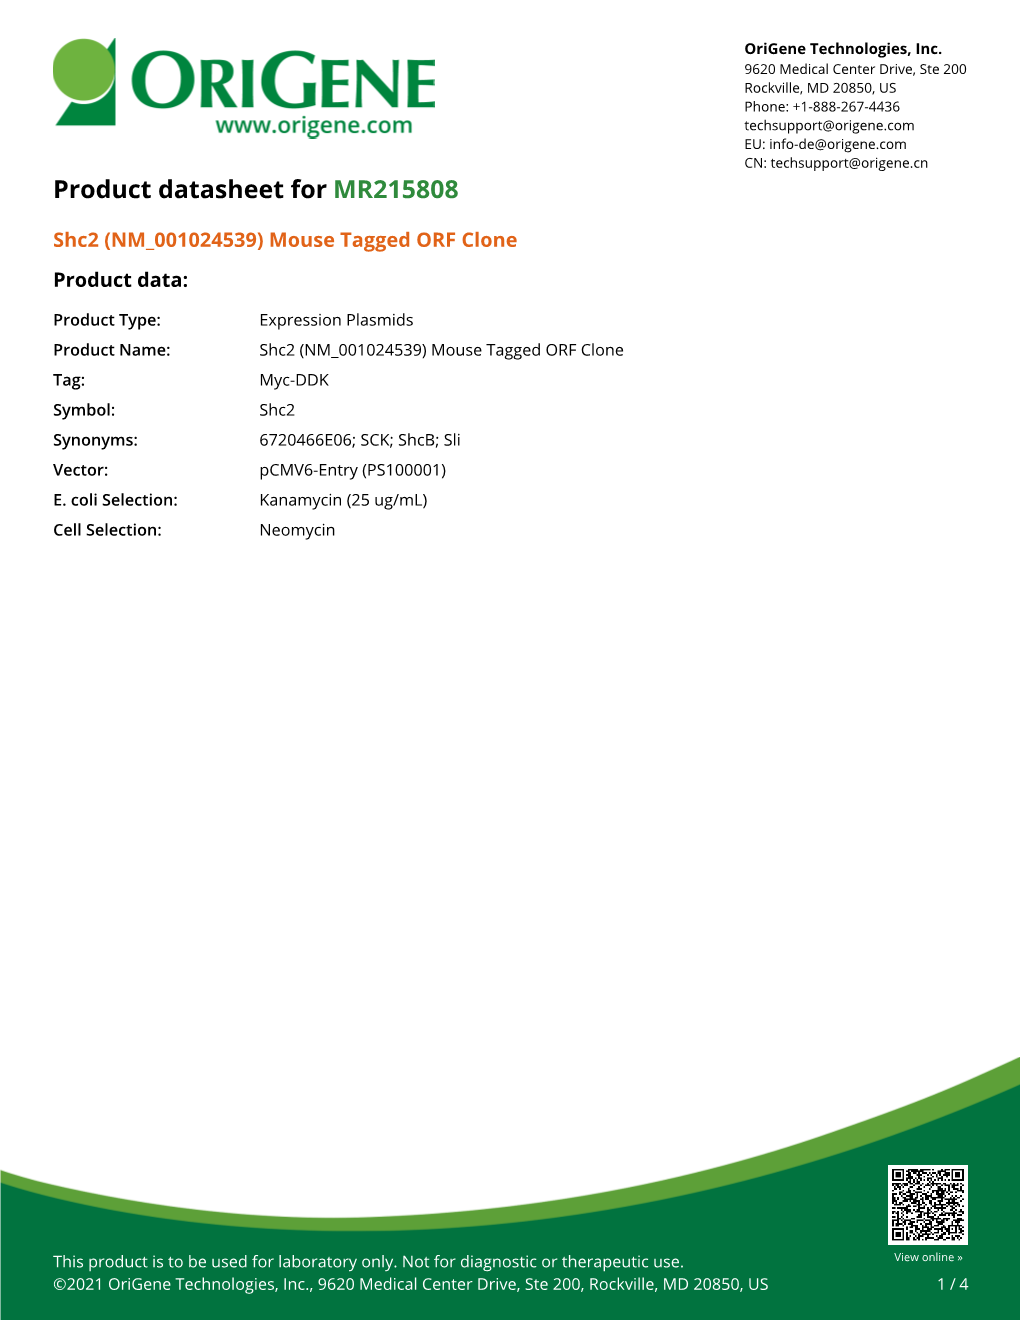 Shc2 (NM 001024539) Mouse Tagged ORF Clone Product Data